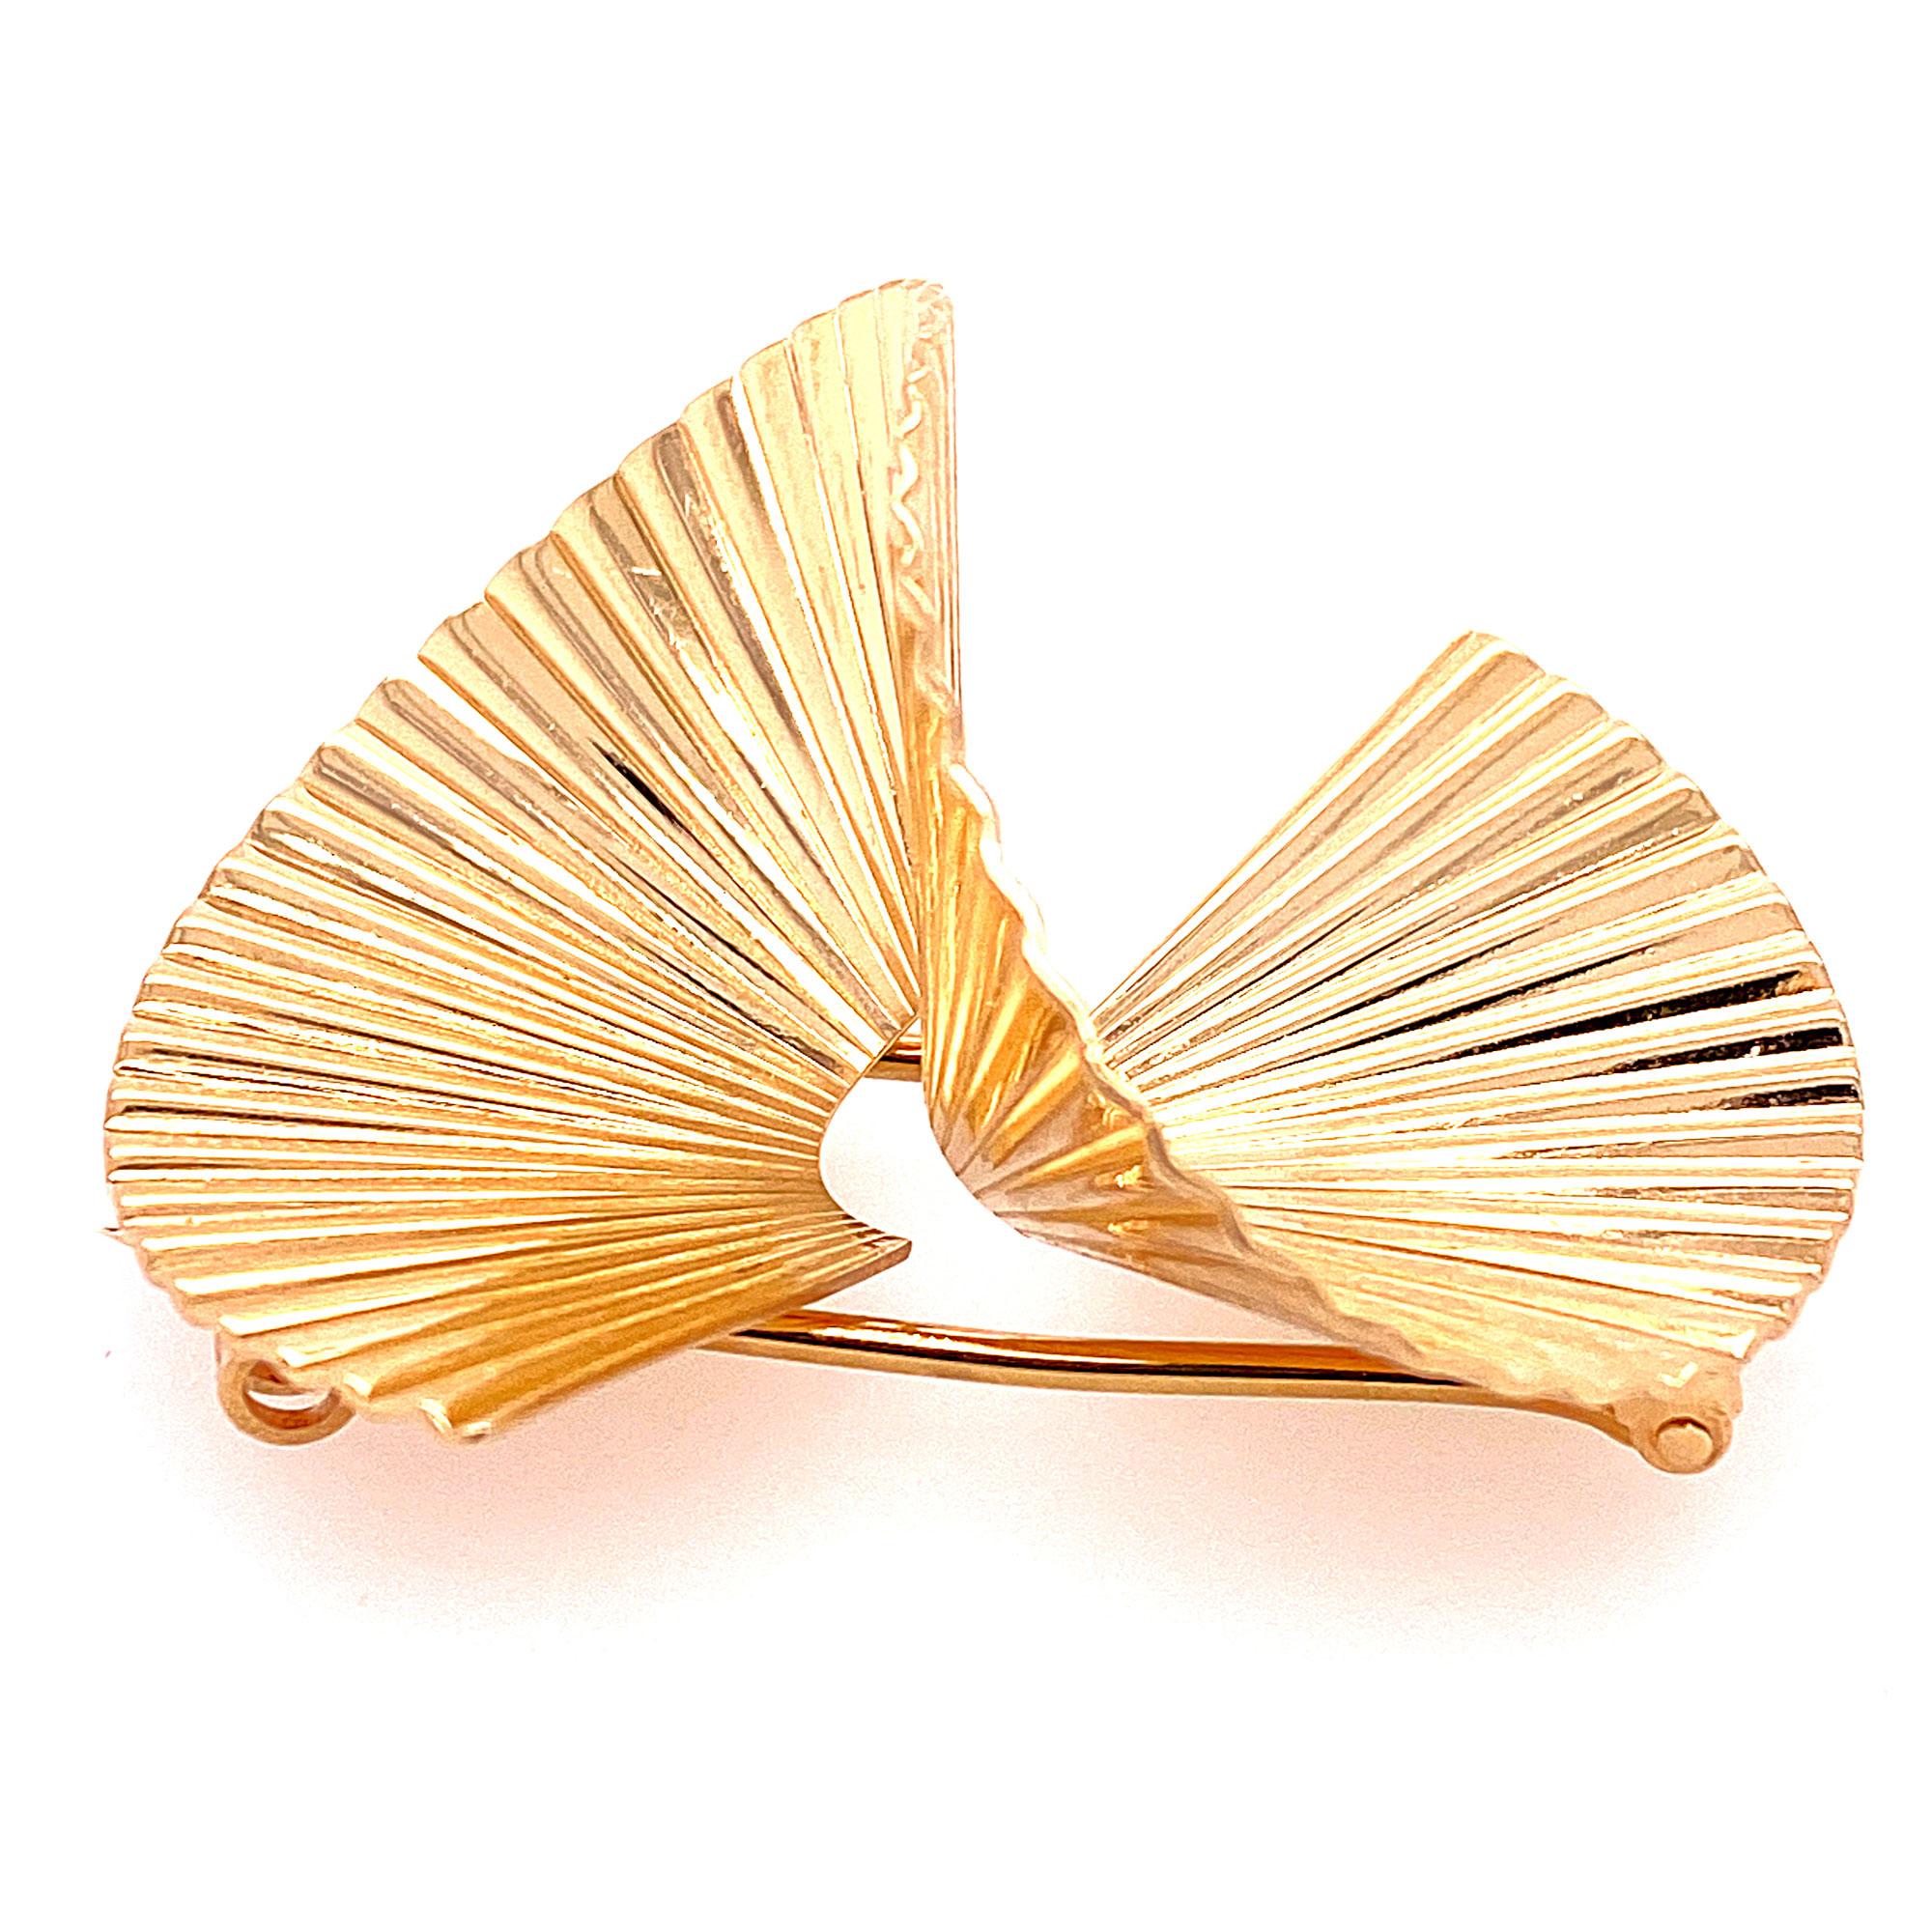 1950's Retro swirl pin by Tiffany & Co. The ribbed pin is fashioned in 14 karat yellow gold and measures 1.75 x 1.50 inches. Signed Tiffany & Co. , numbered, and 14k. 